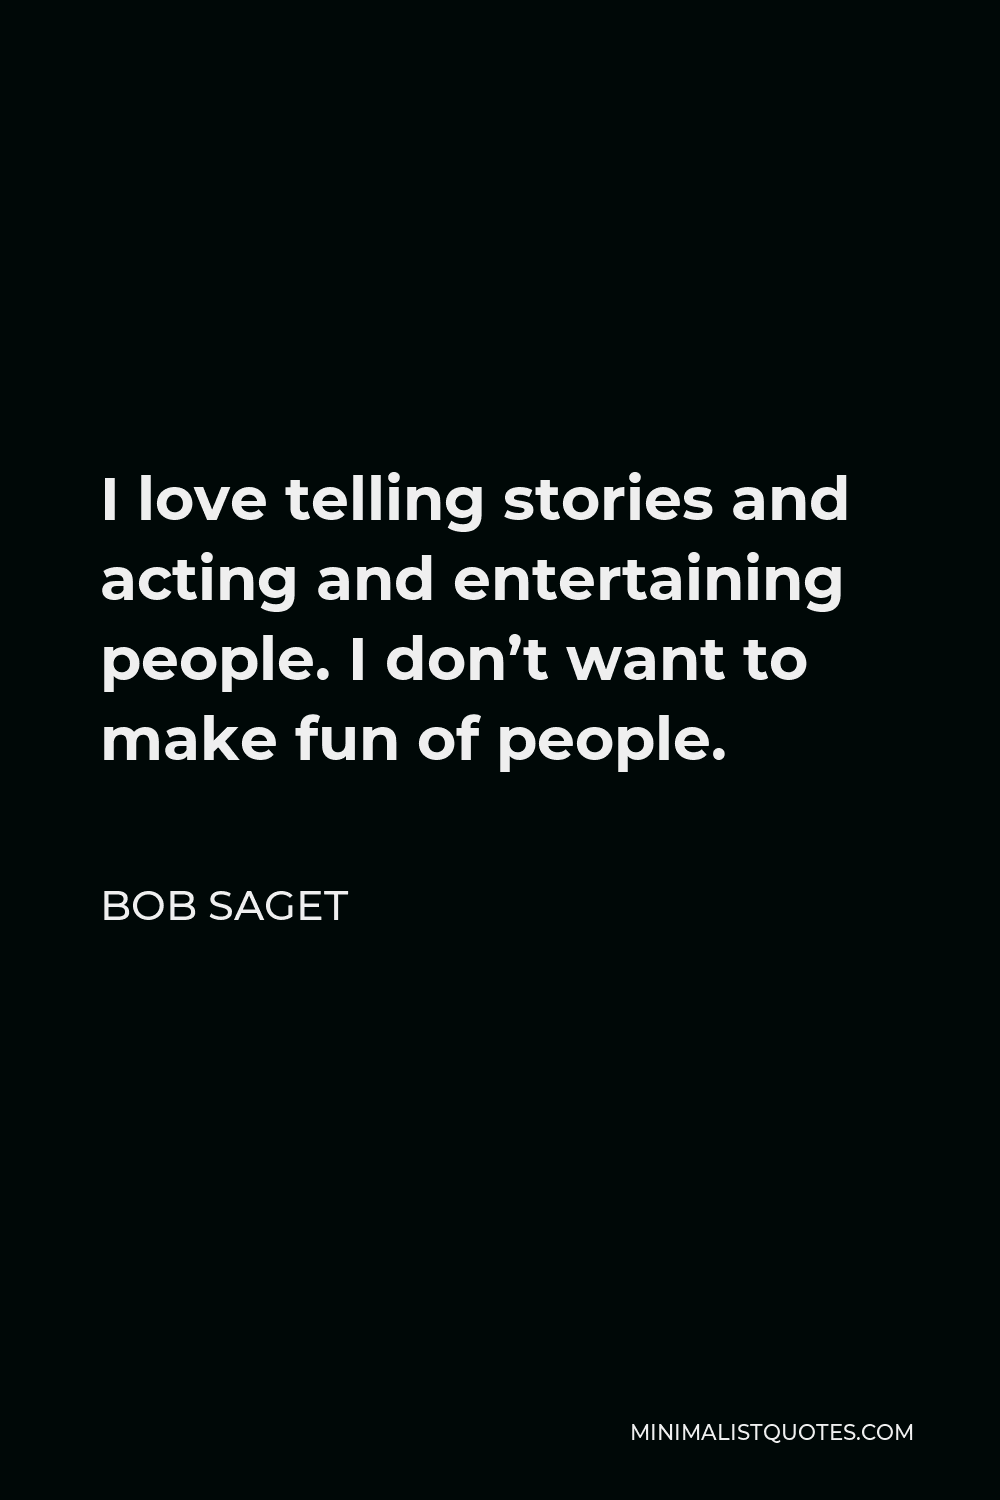 Bob Saget Quote - I love telling stories and acting and entertaining people. I don’t want to make fun of people.